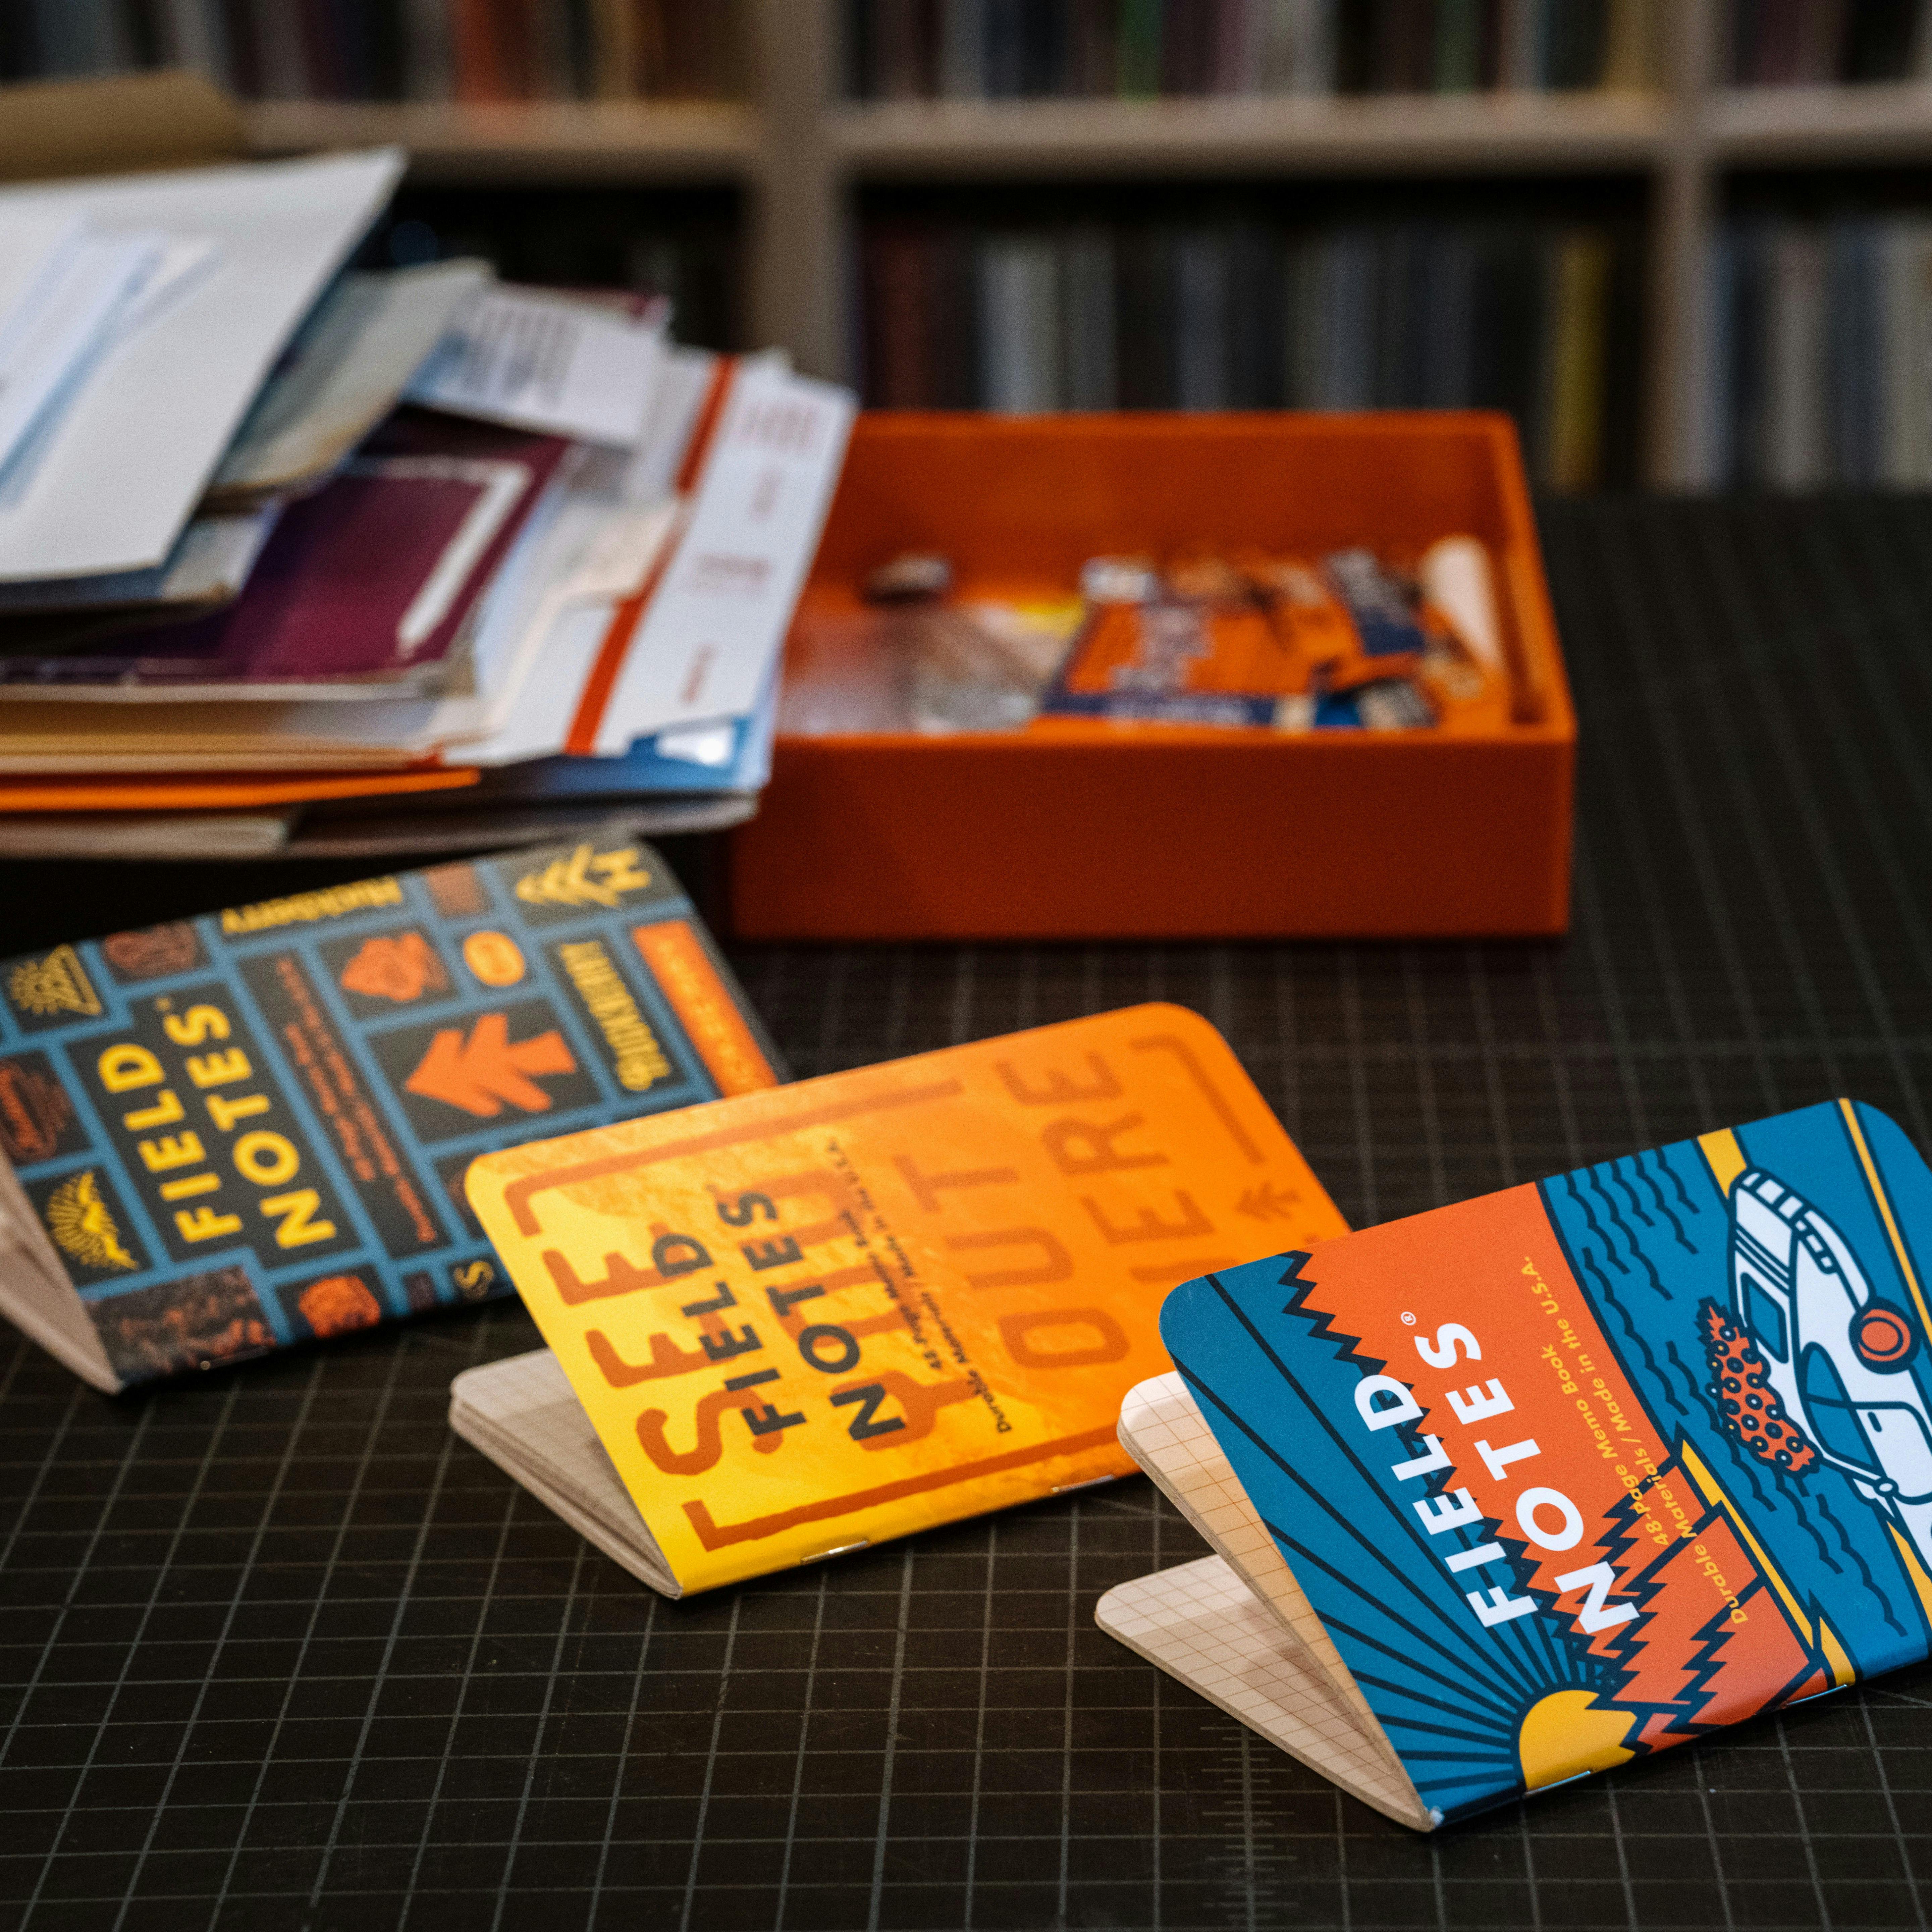 https://huckberry.imgix.net/spree/products/692032/original/78648_Field_Notes_Huckberry_x_Draplin_for_Field_Notes_3-Pack_-_Exclusive_3_Pack_Lifestyle_26_PDP_WEB.jpg?auto=format%2C%20compress&crop=top&fit=clip&cs=tinysrgb&ixlib=react-9.5.2